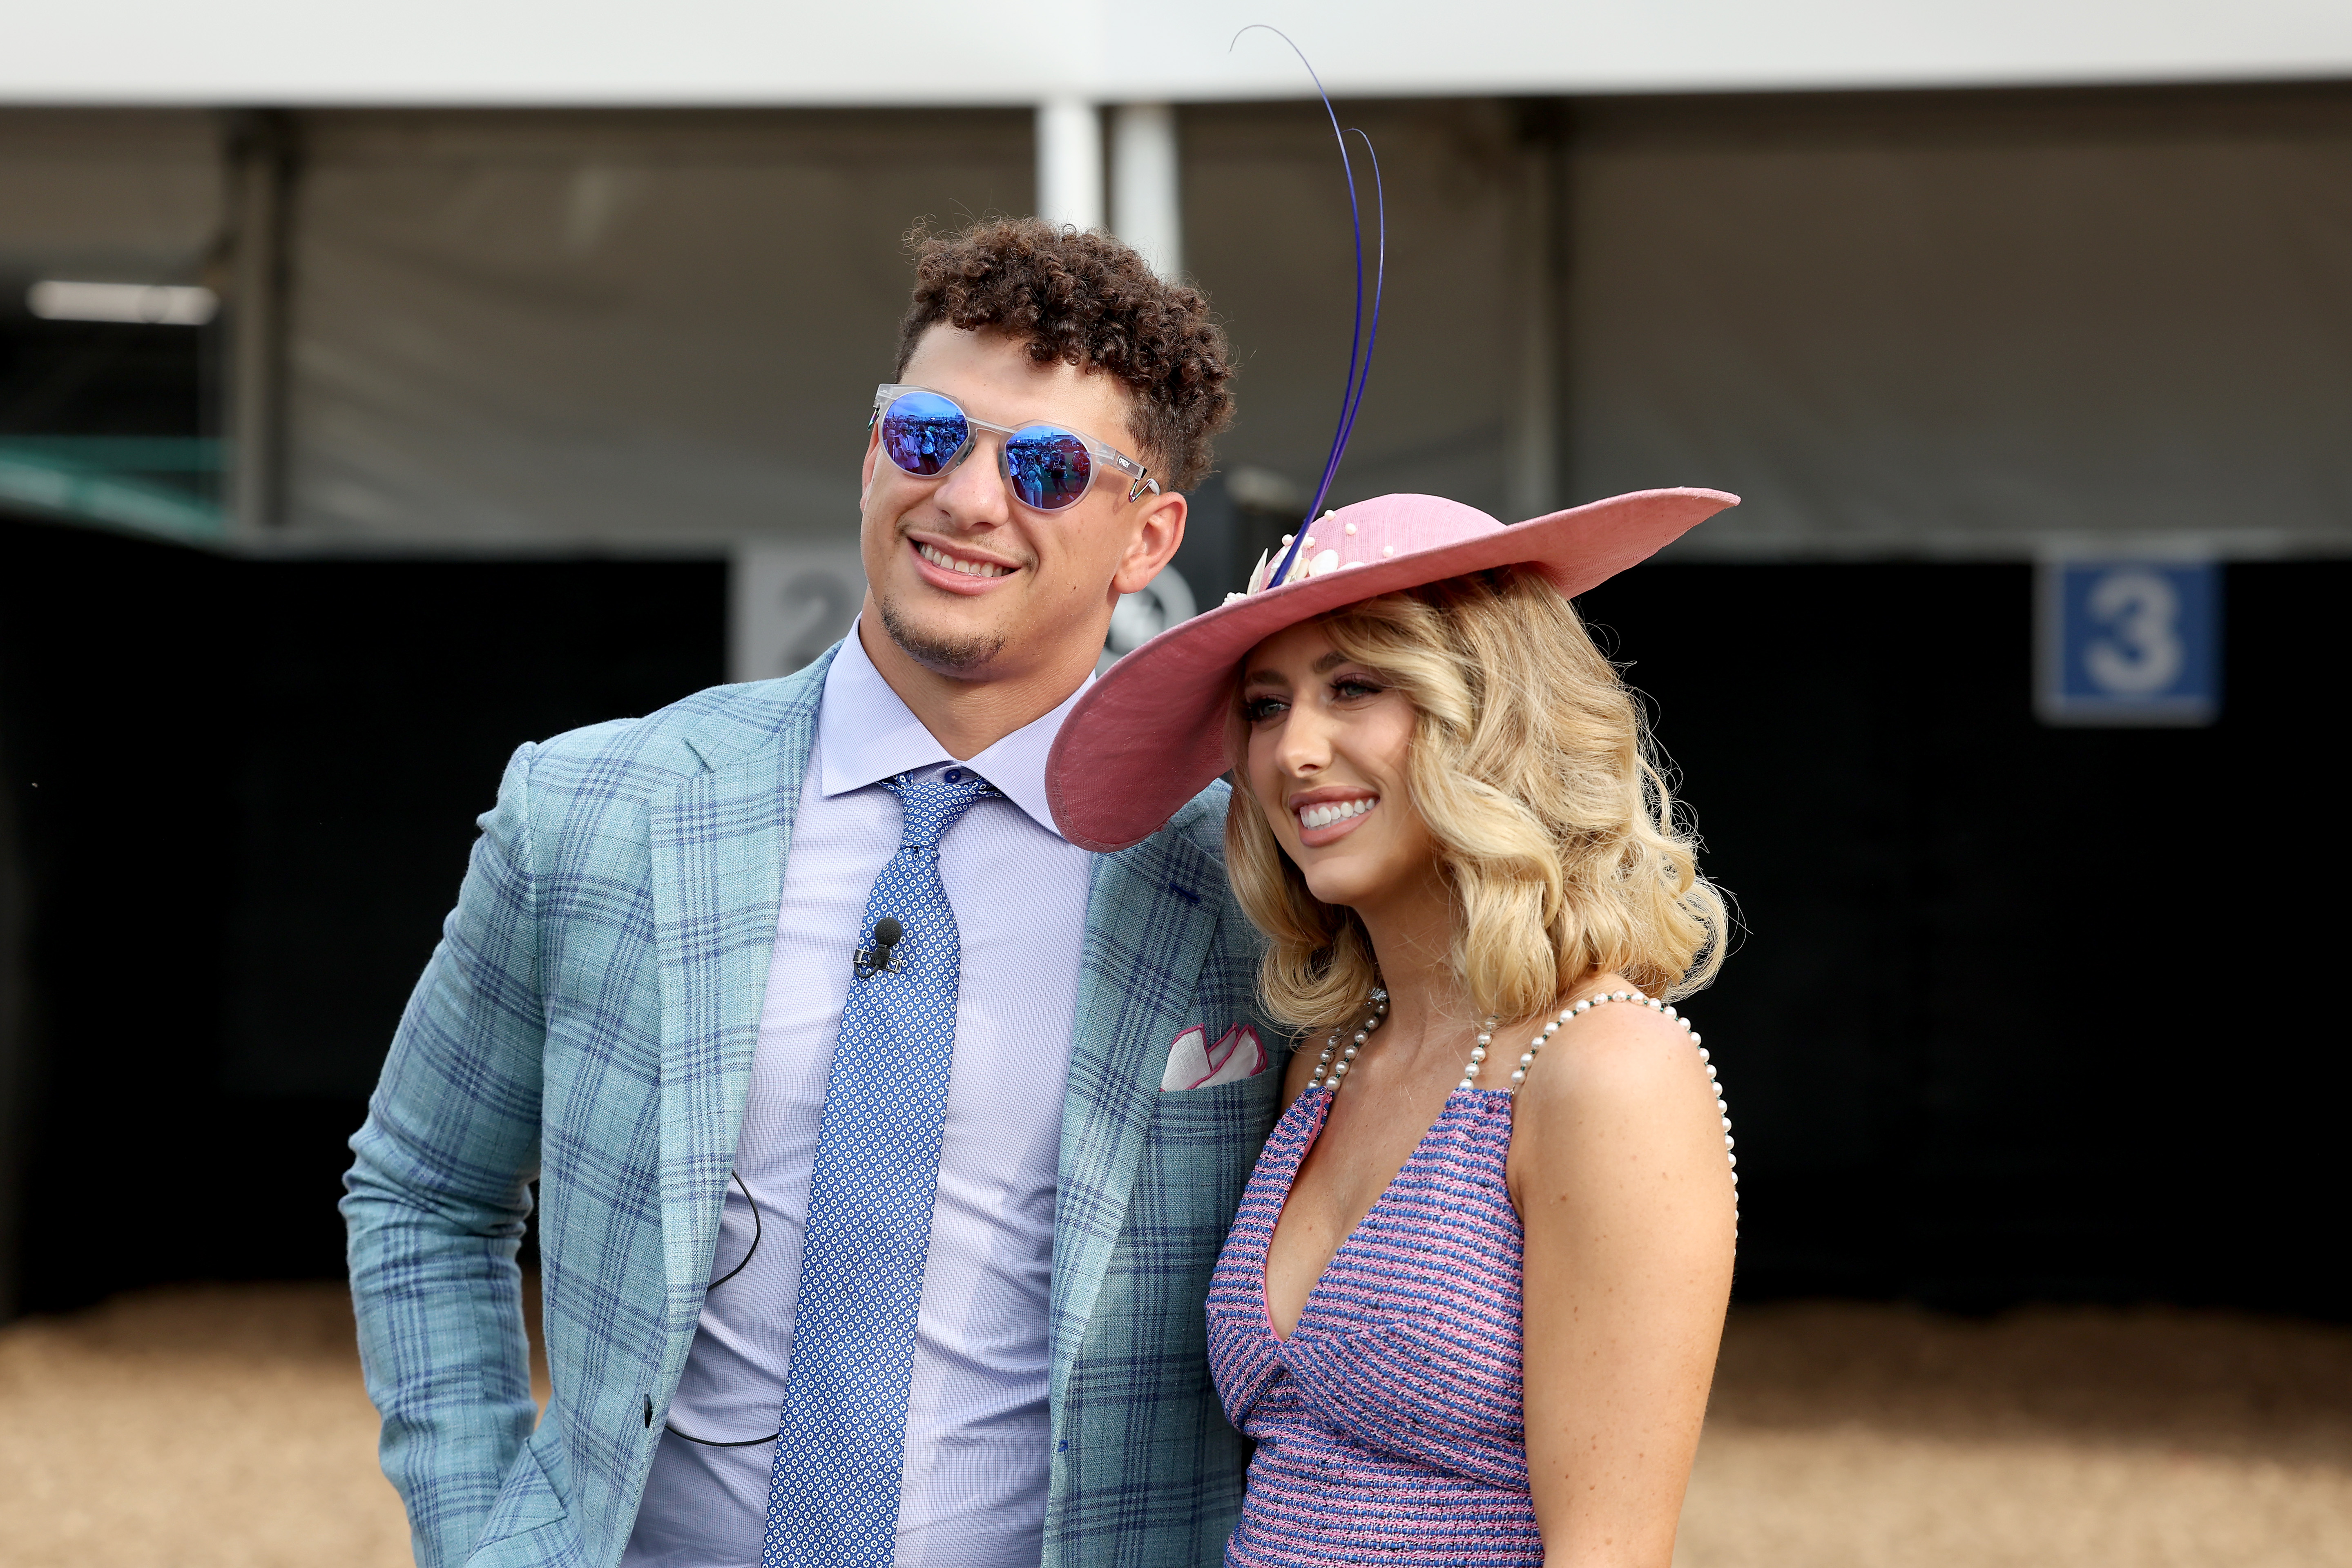 Patrick Mahomes and Brittany Mahomes strike a pose in Louisville, Kentucky during the 149th running of the Kentucky Derby at Churchill Downs | Source: Getty Images